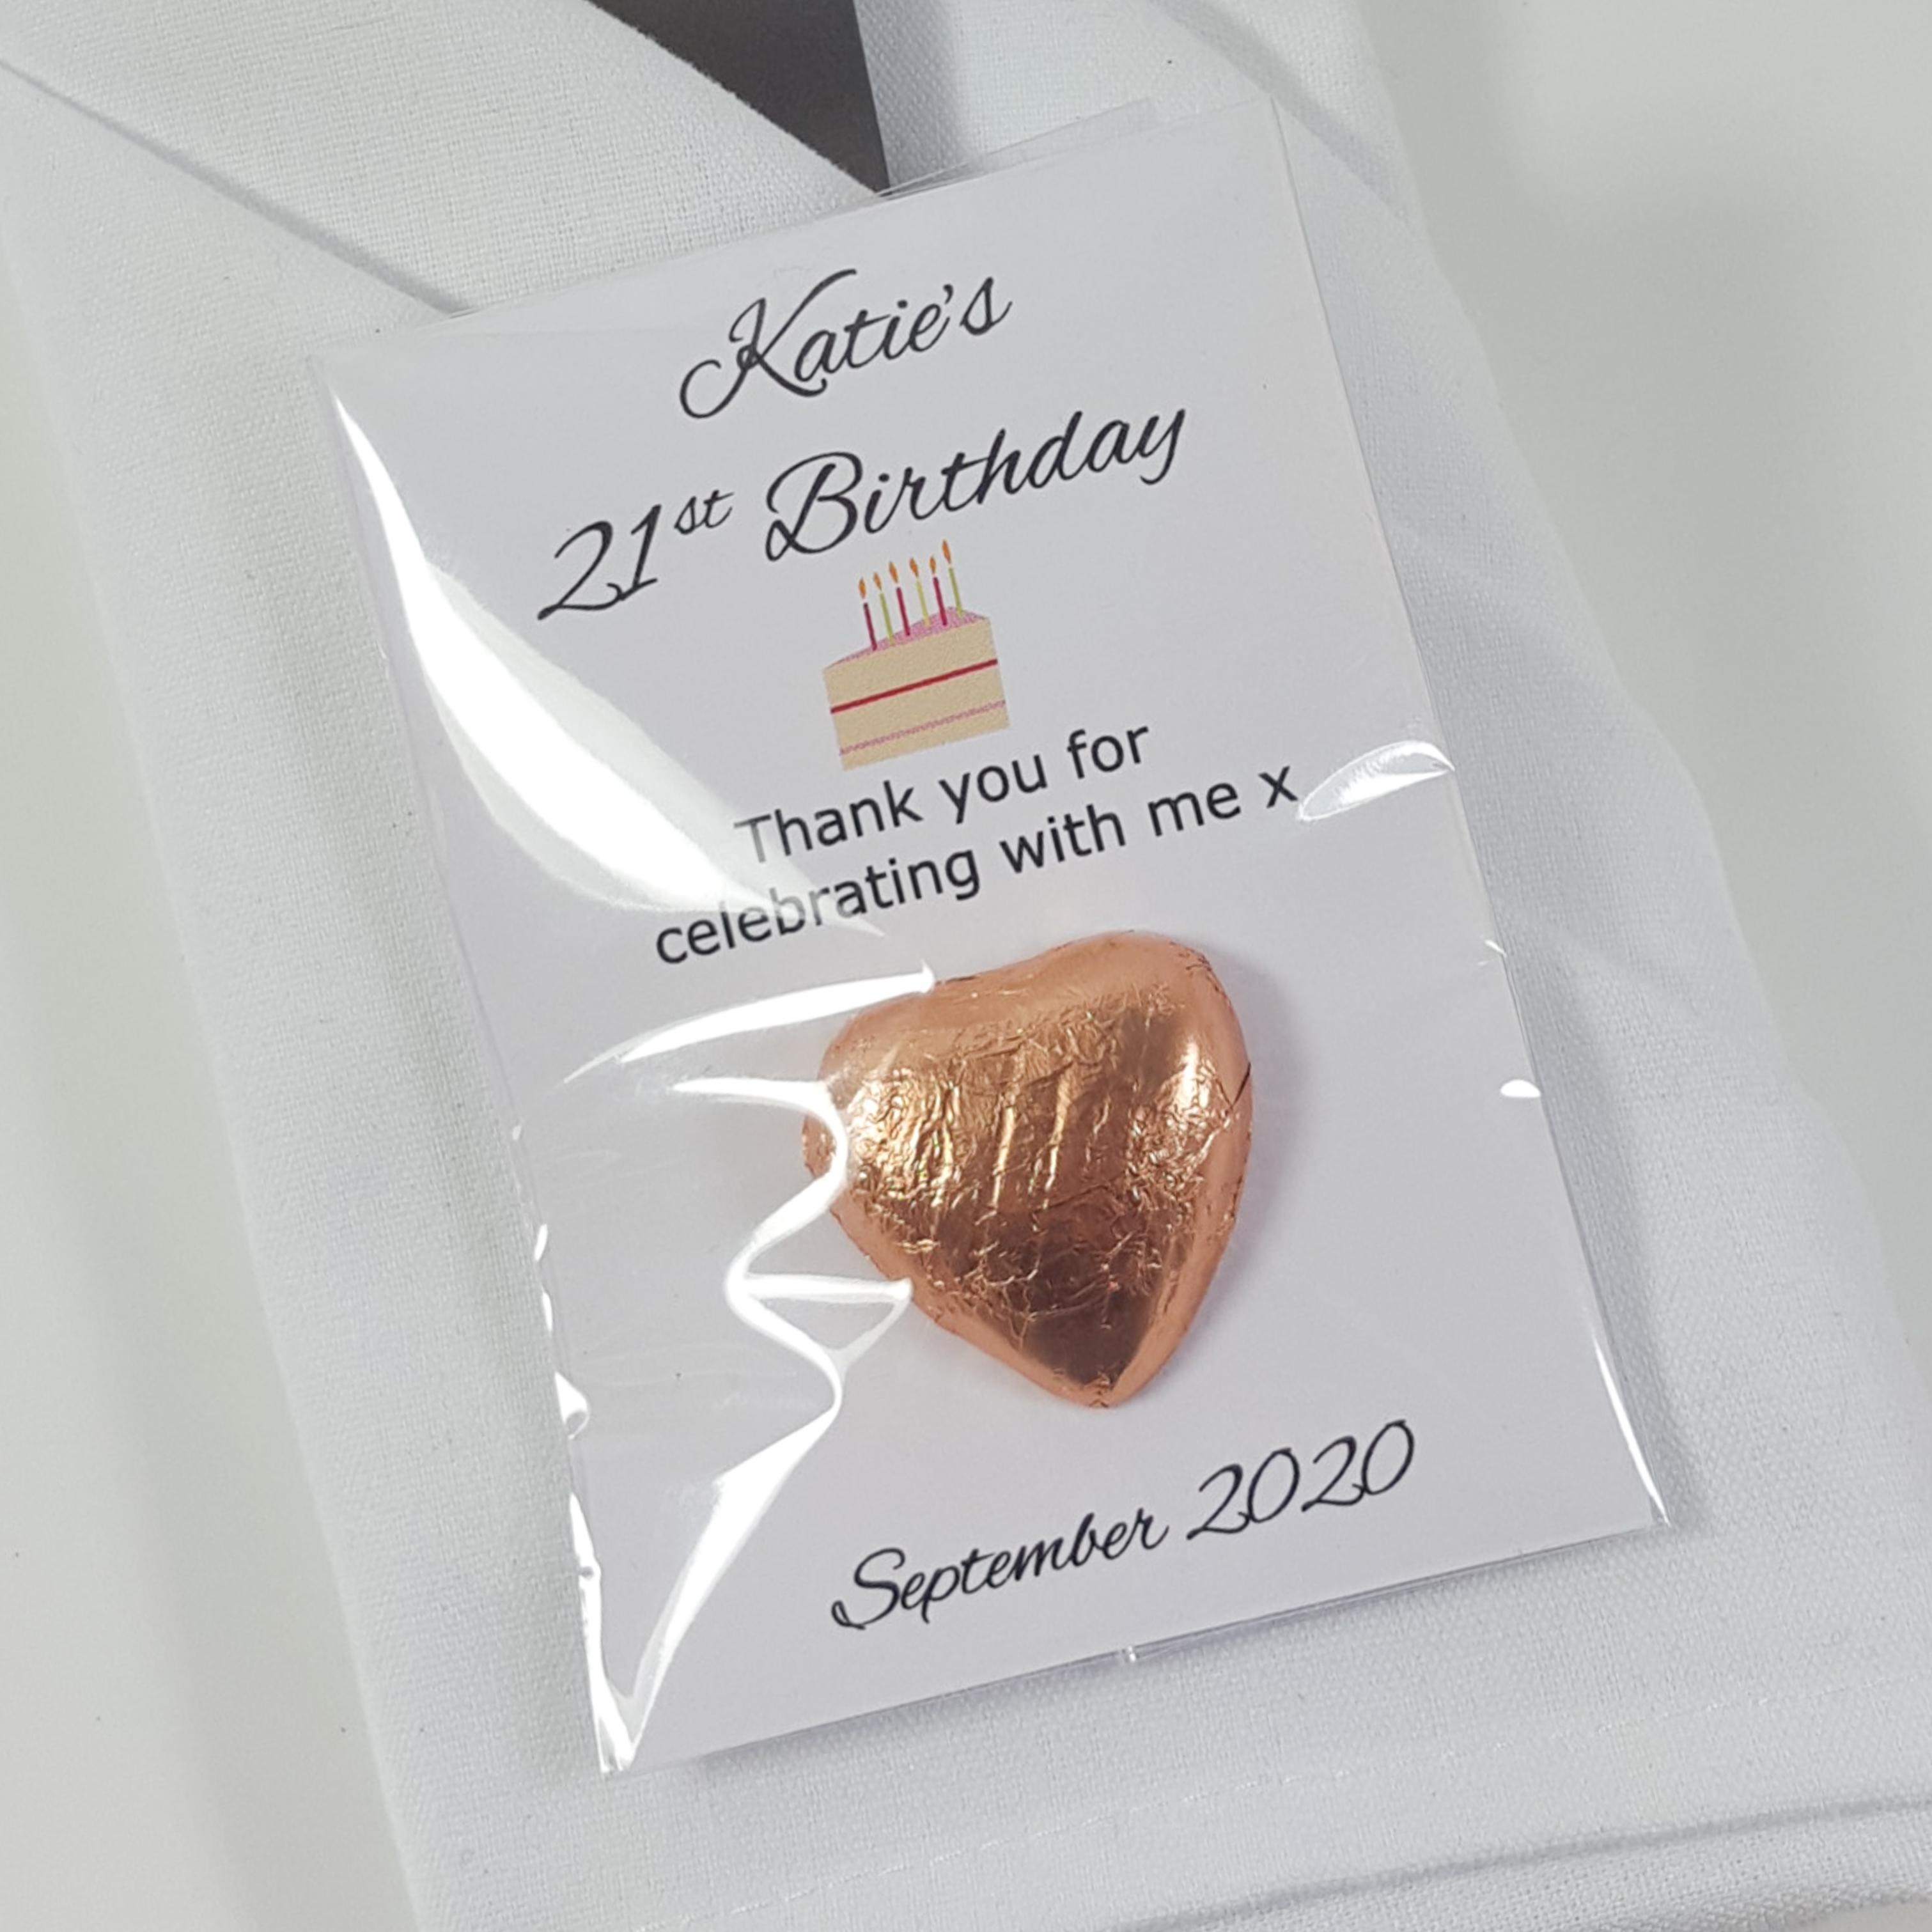 Personalised chocolate favour with cake artwork